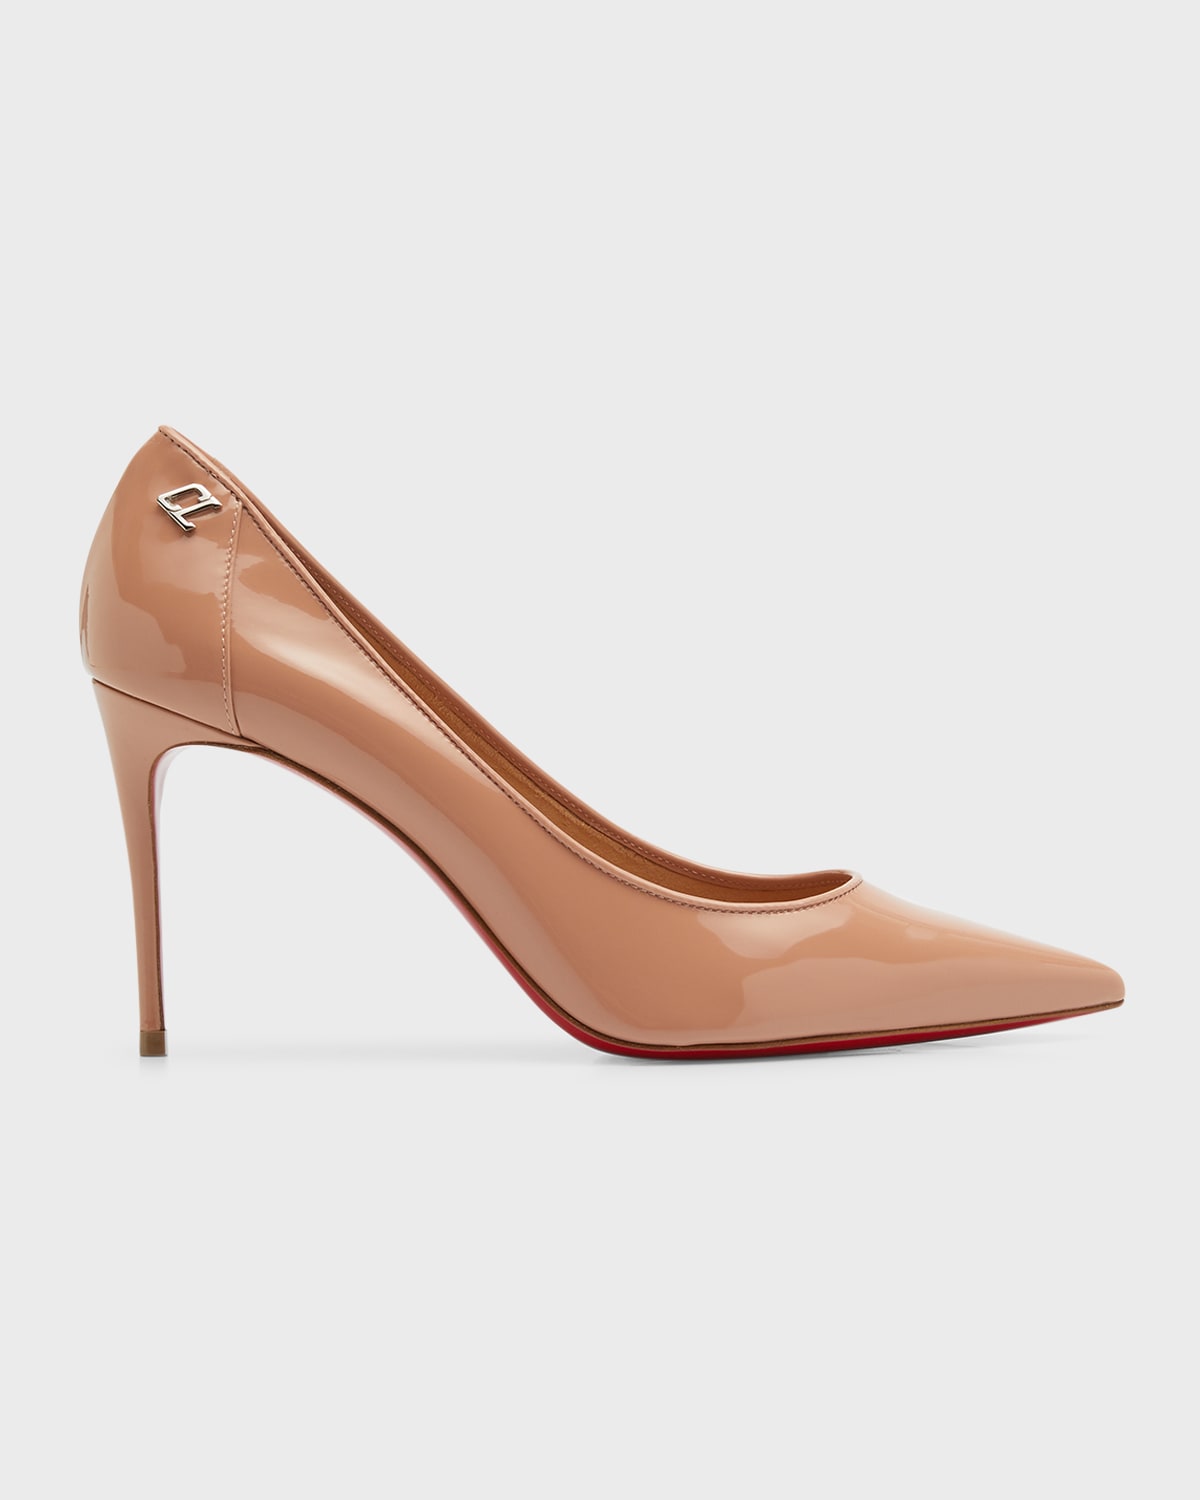 Christian Kate Red Sole High-Heel Pumps, | Neiman Marcus